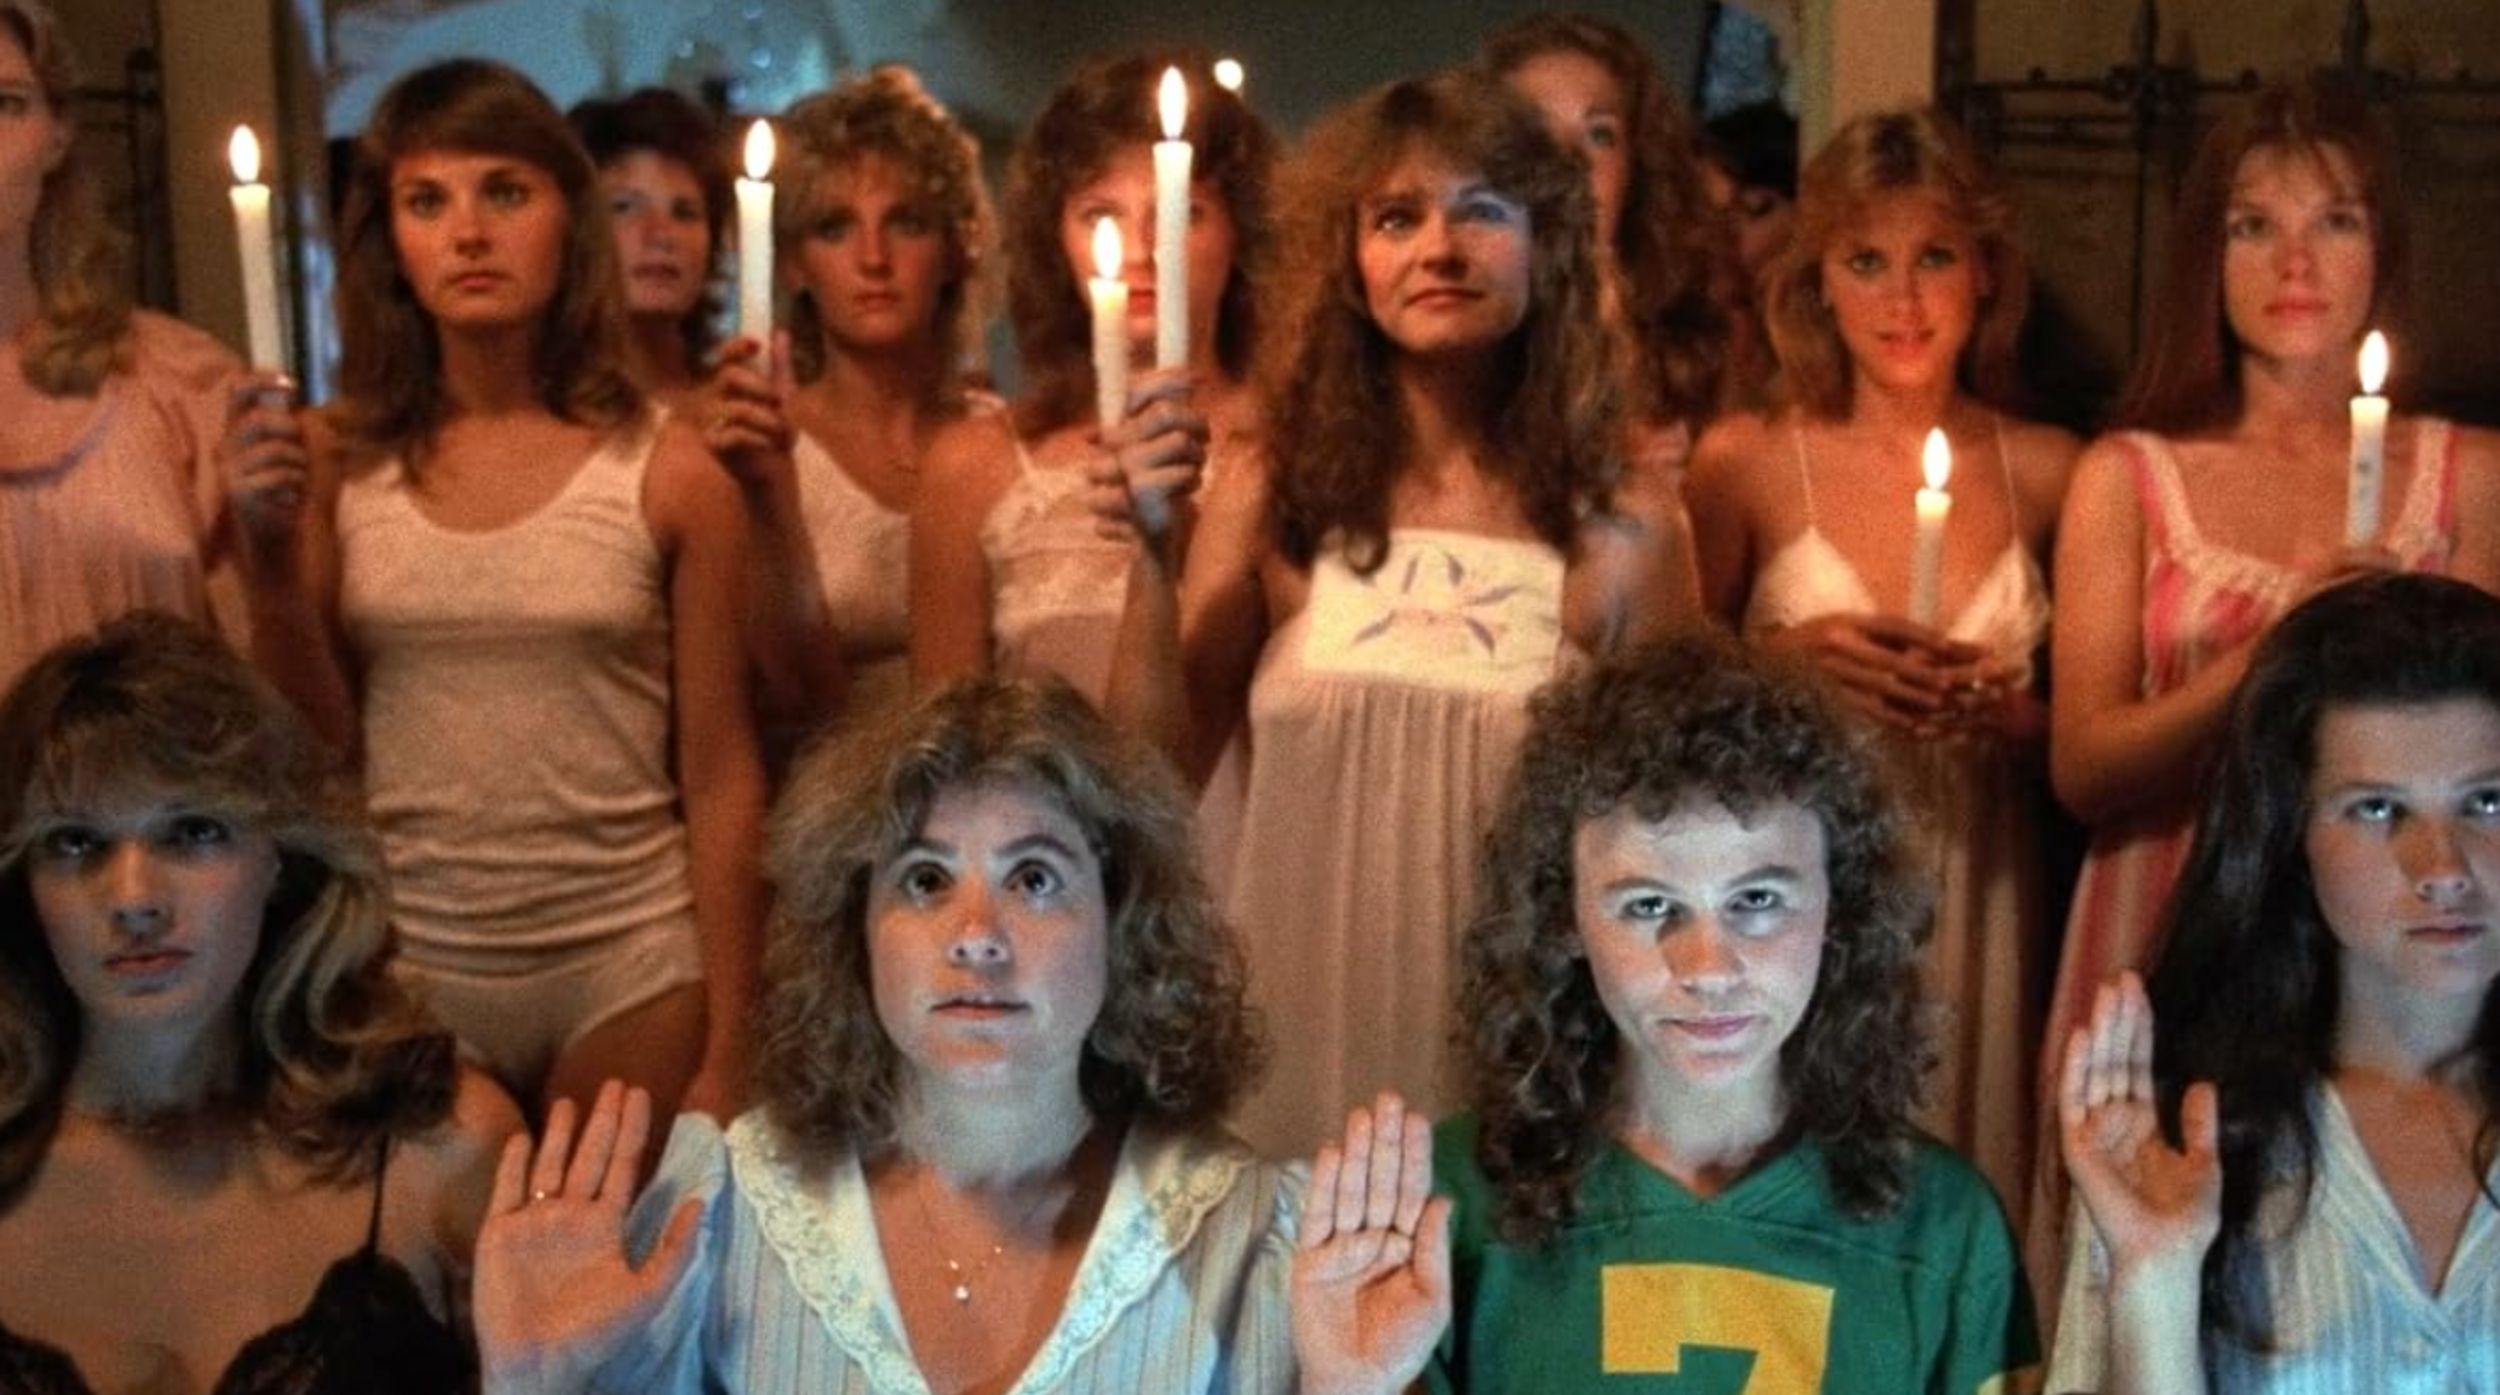 <p><em>The Initiation</em> has more than its share of tropes — a sorority hazing ritual, teens breaking into a place they’re not supposed to be, victims getting knocked off one at a time by a mysterious killer, and, of course, some obligatory nudity — but it's actually a solid slasher. Daphne Zuniga plays the lead in this fun film directed by Larry Stewart.</p><p>You may also like: <a href='https://www.yardbarker.com/entertainment/articles/20_country_songs_you_didnt_know_were_written_by_famous_artists/s1__40253893'>20 country songs you didn't know were written by famous artists</a></p>